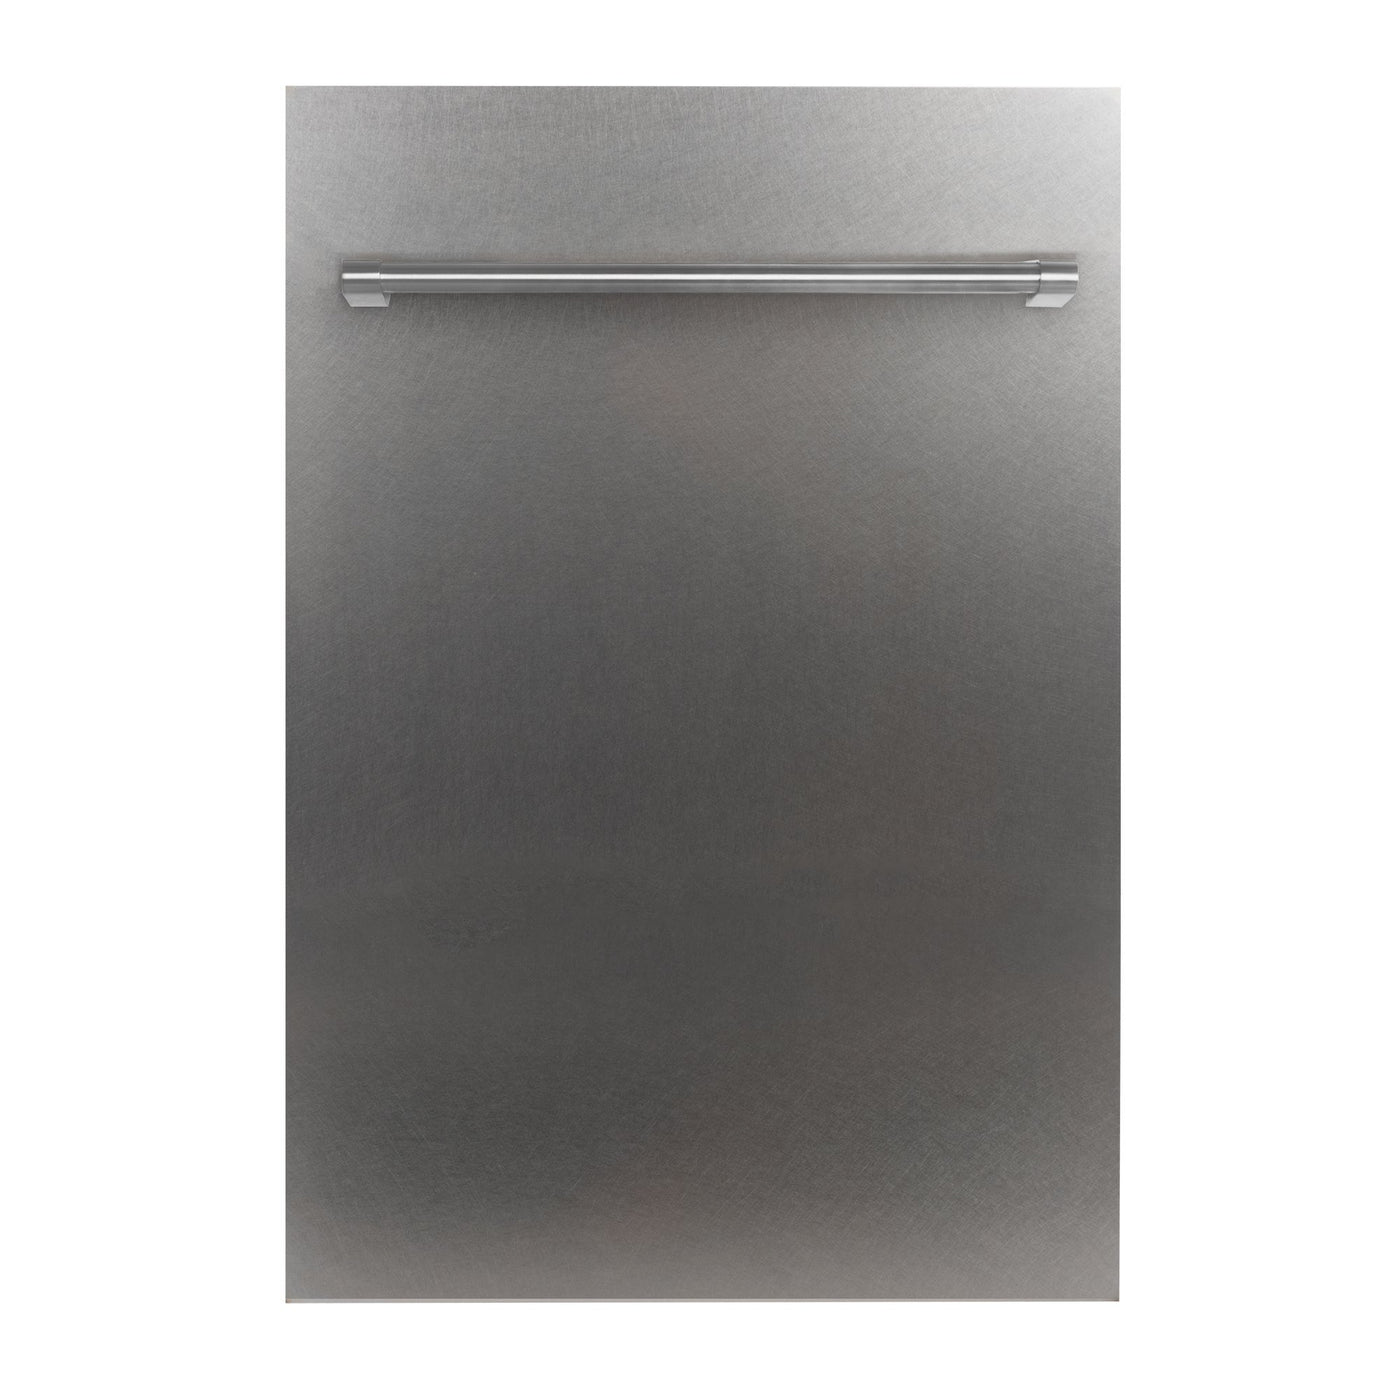 ZLINE Kitchen and Bath, ZLINE 18" Top Control Dishwasher in Custom Panel Ready with Stainless Steel Tub, DW-SS-H-18, ZLINE 18 in. Top Control Built-In Dishwasher - Custom Panel Ready  | Rustic Kitchen and Bath